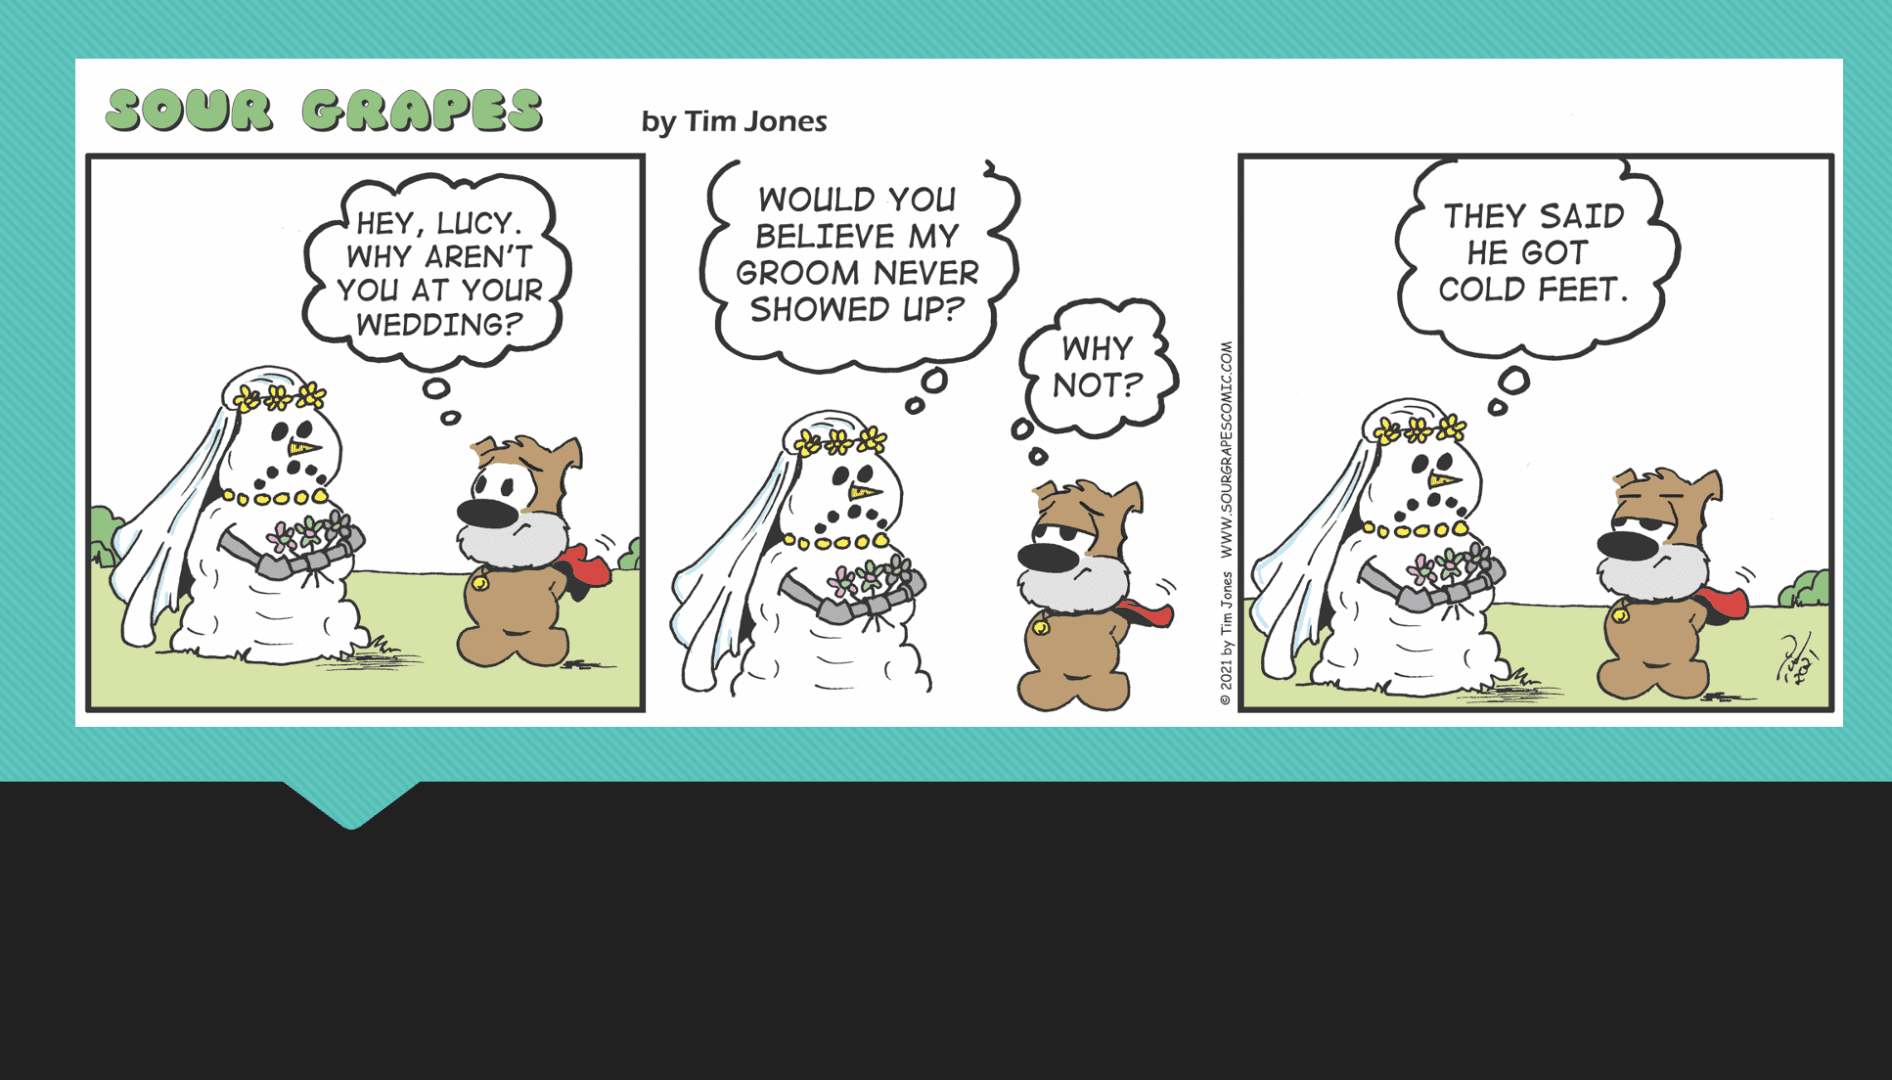 A comic strip about a bride and a teddy bear.